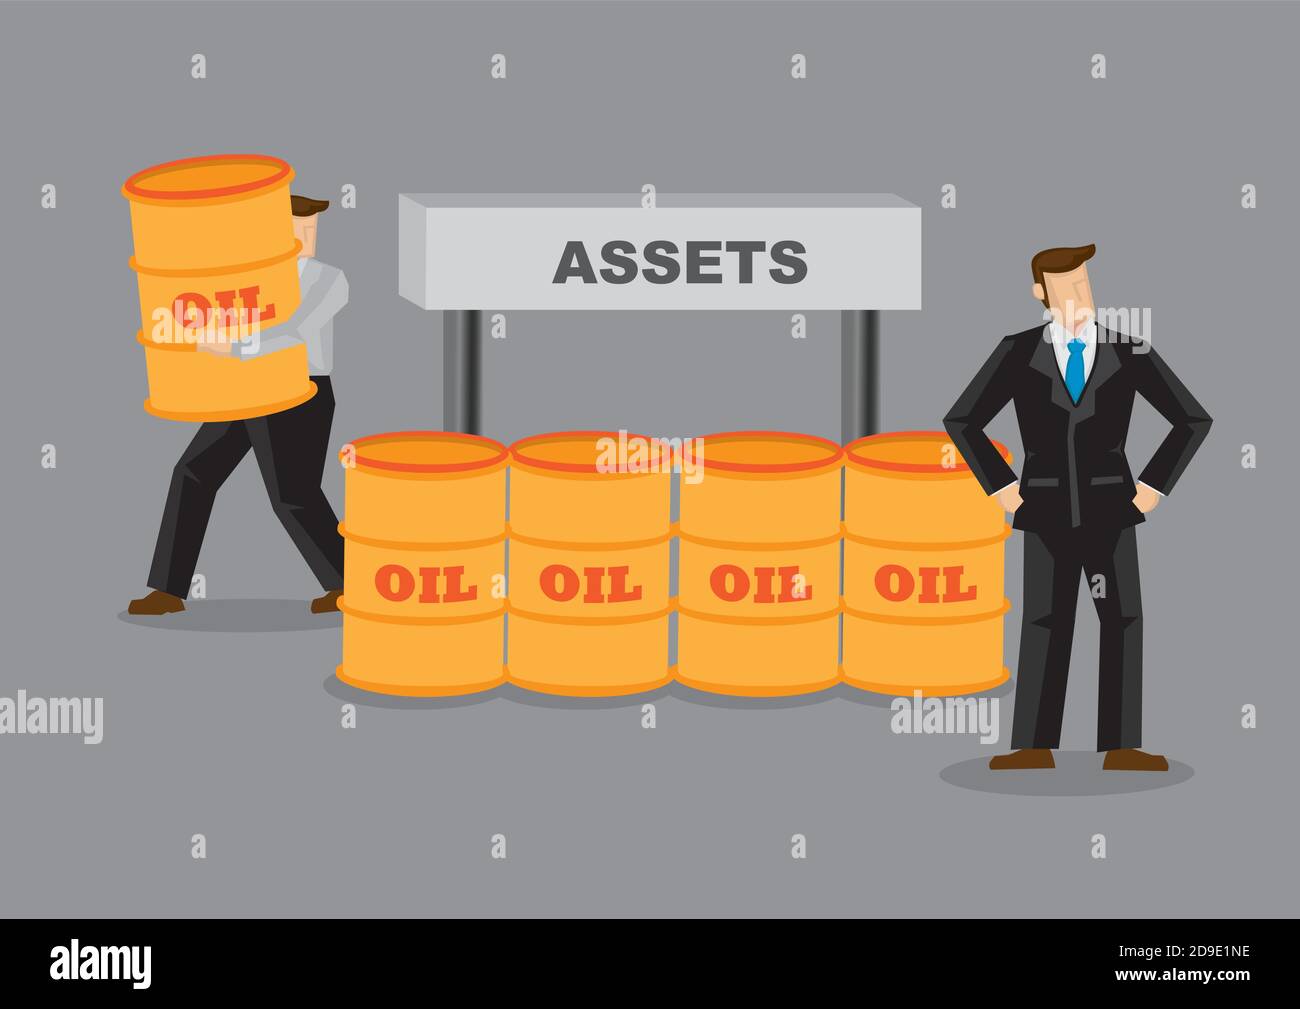 Business owner of oil company not aware of employee stealing his asset. Creative cartoon vector illustration for internal fraud of dishonest employee. Stock Vector